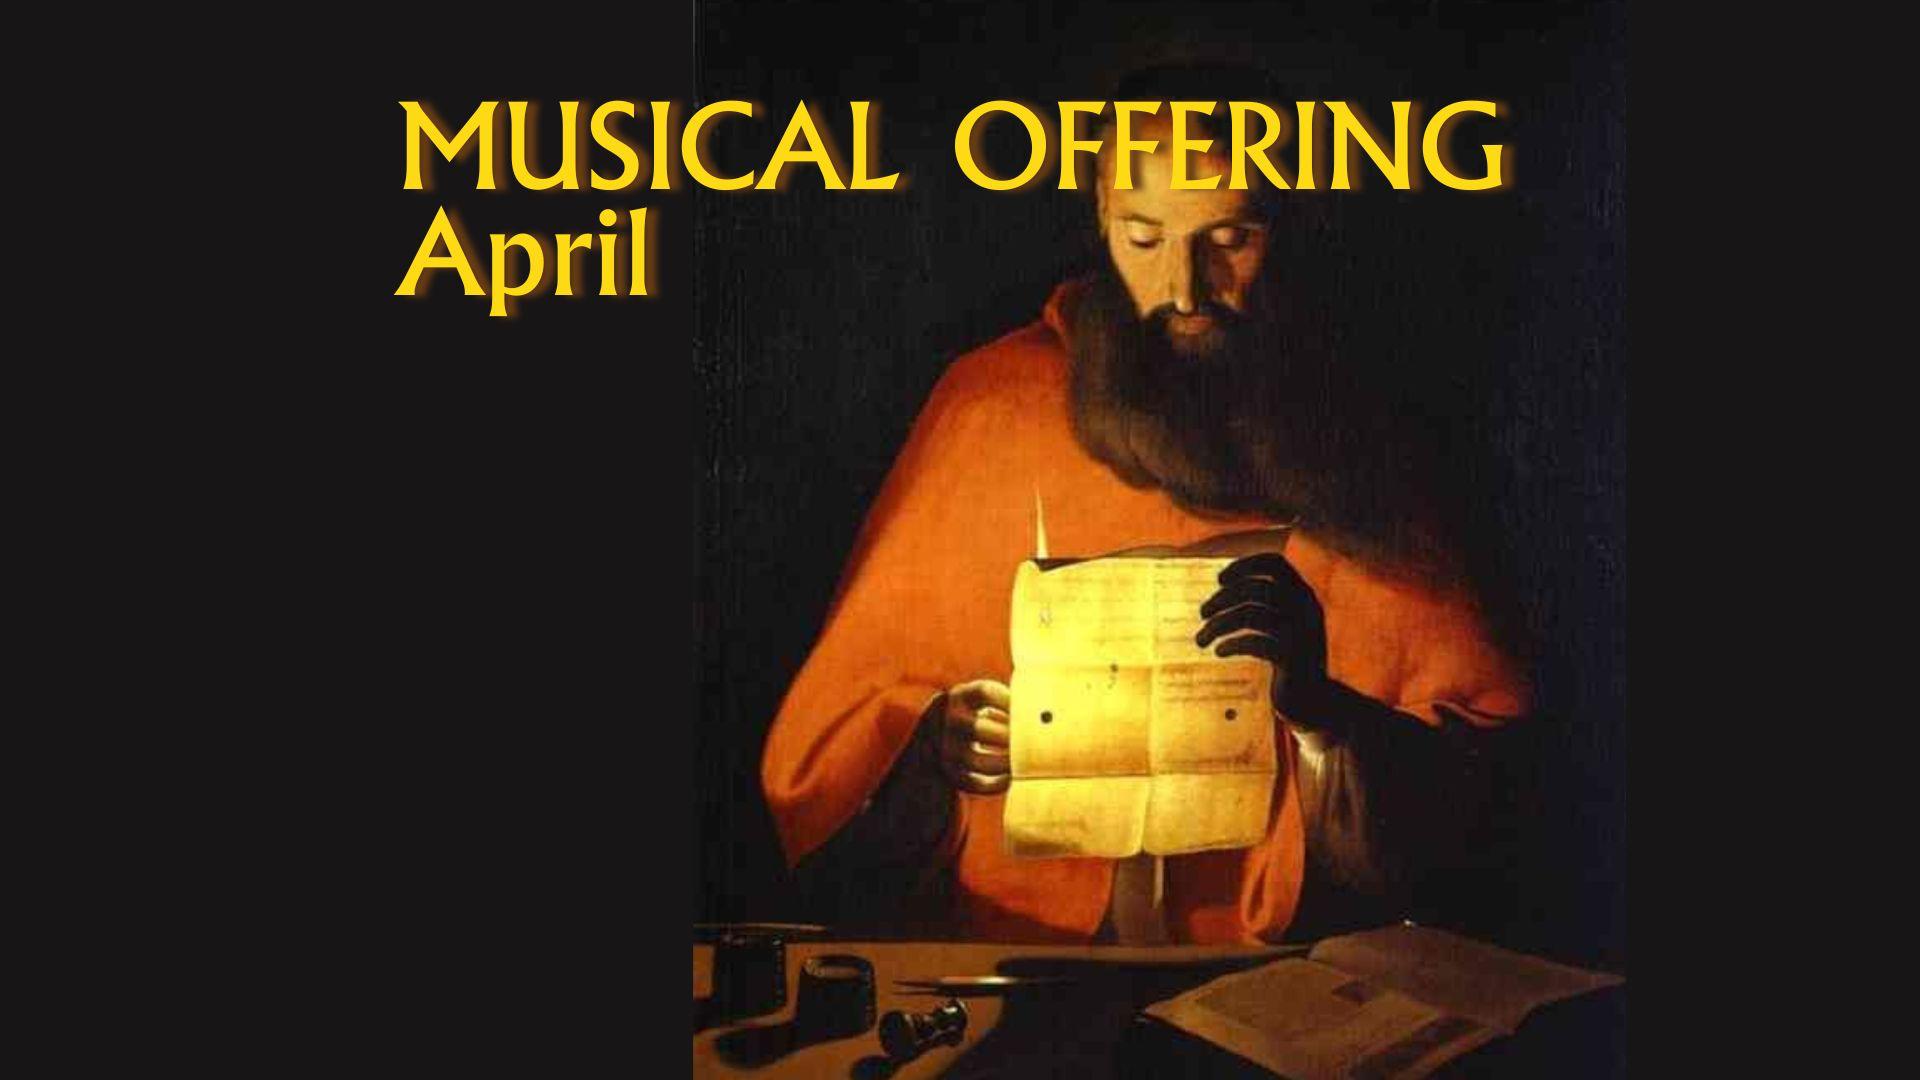 Musical Offering April: Bach’s 3 sonatas for viola de gamba and harpsichord ~ Live Broadcast